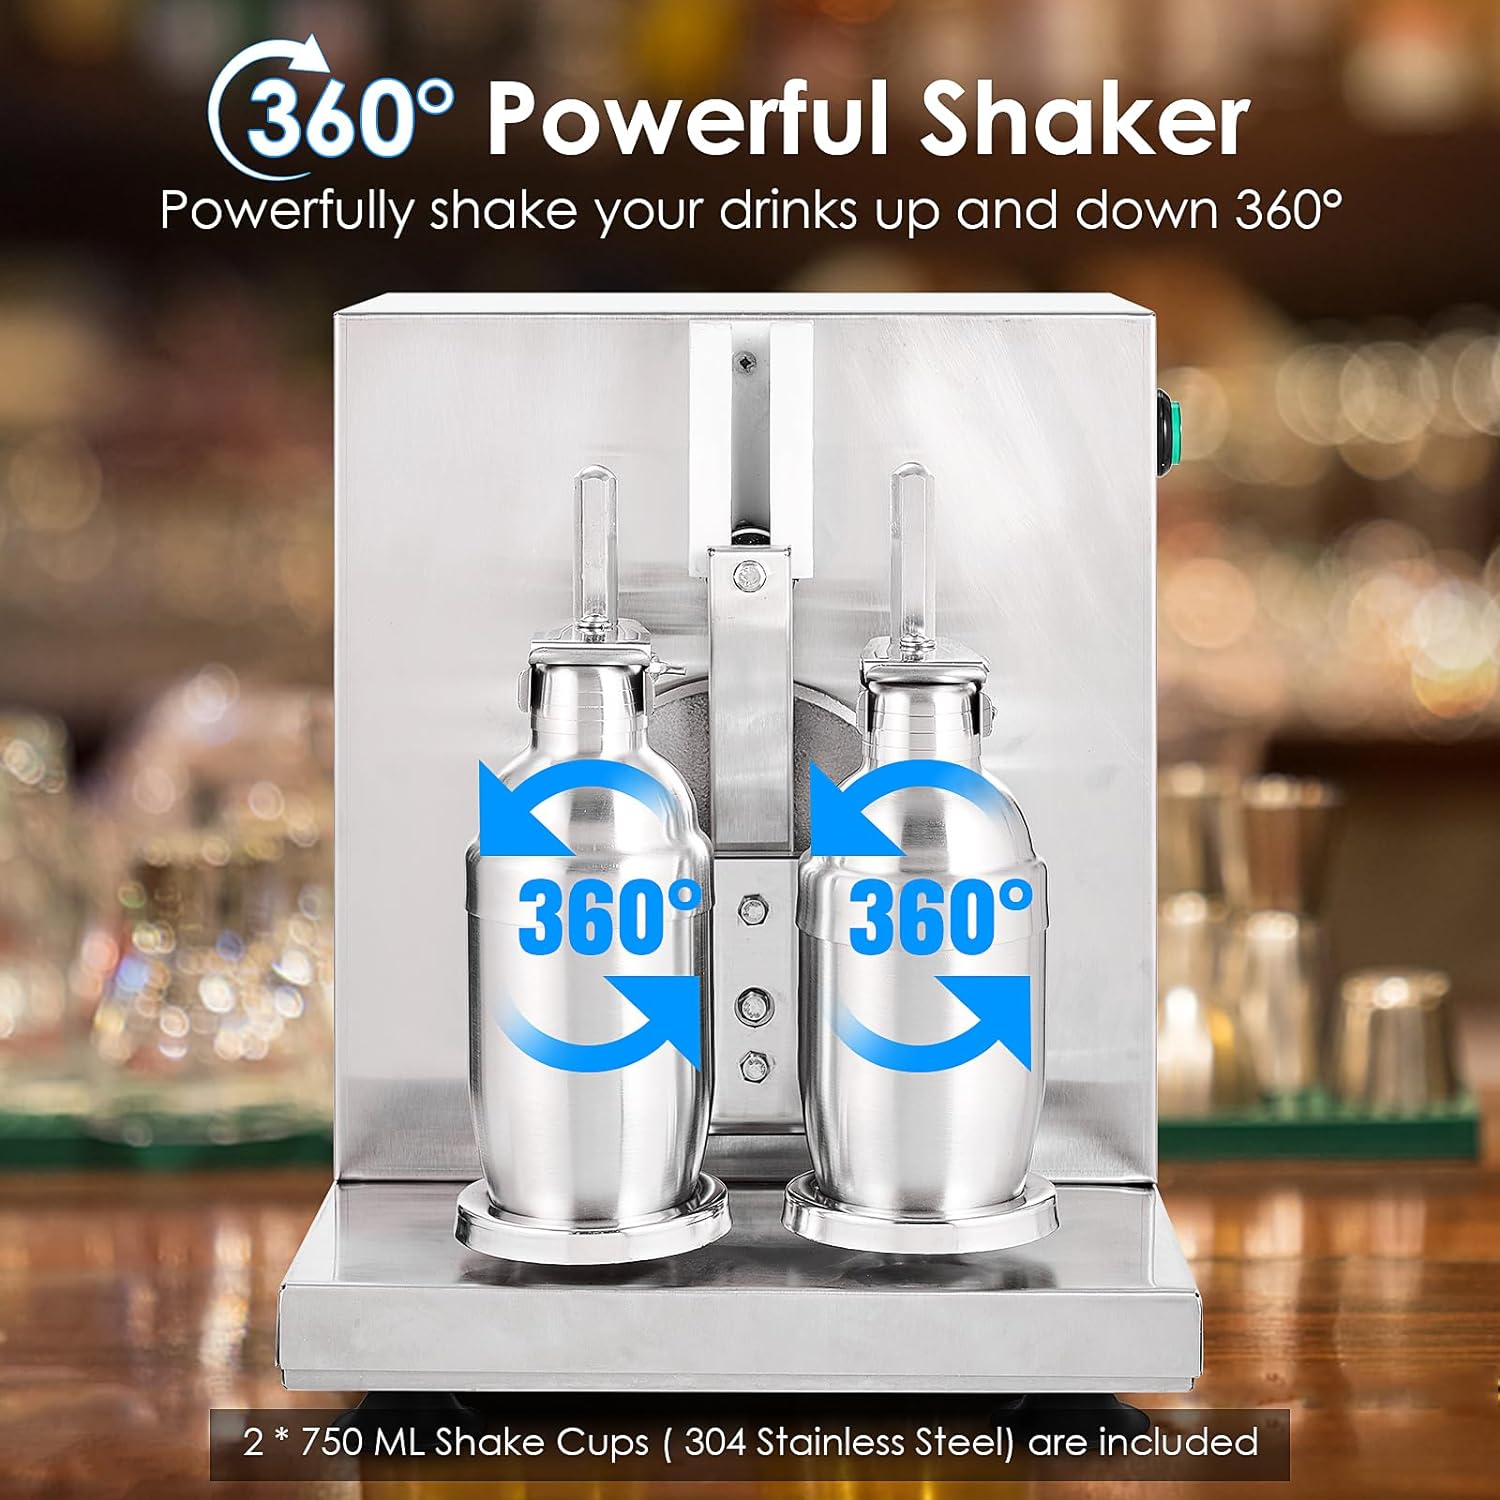 Automatic Milk Tea Shaking Machine, Electric Double Frame Milk Tea and Cocktail Shaker, 400r/min, Stainless Steel & Double Cups for for Bubble Tea, Boba Tea, Juice, Coffee, Milk, Wine